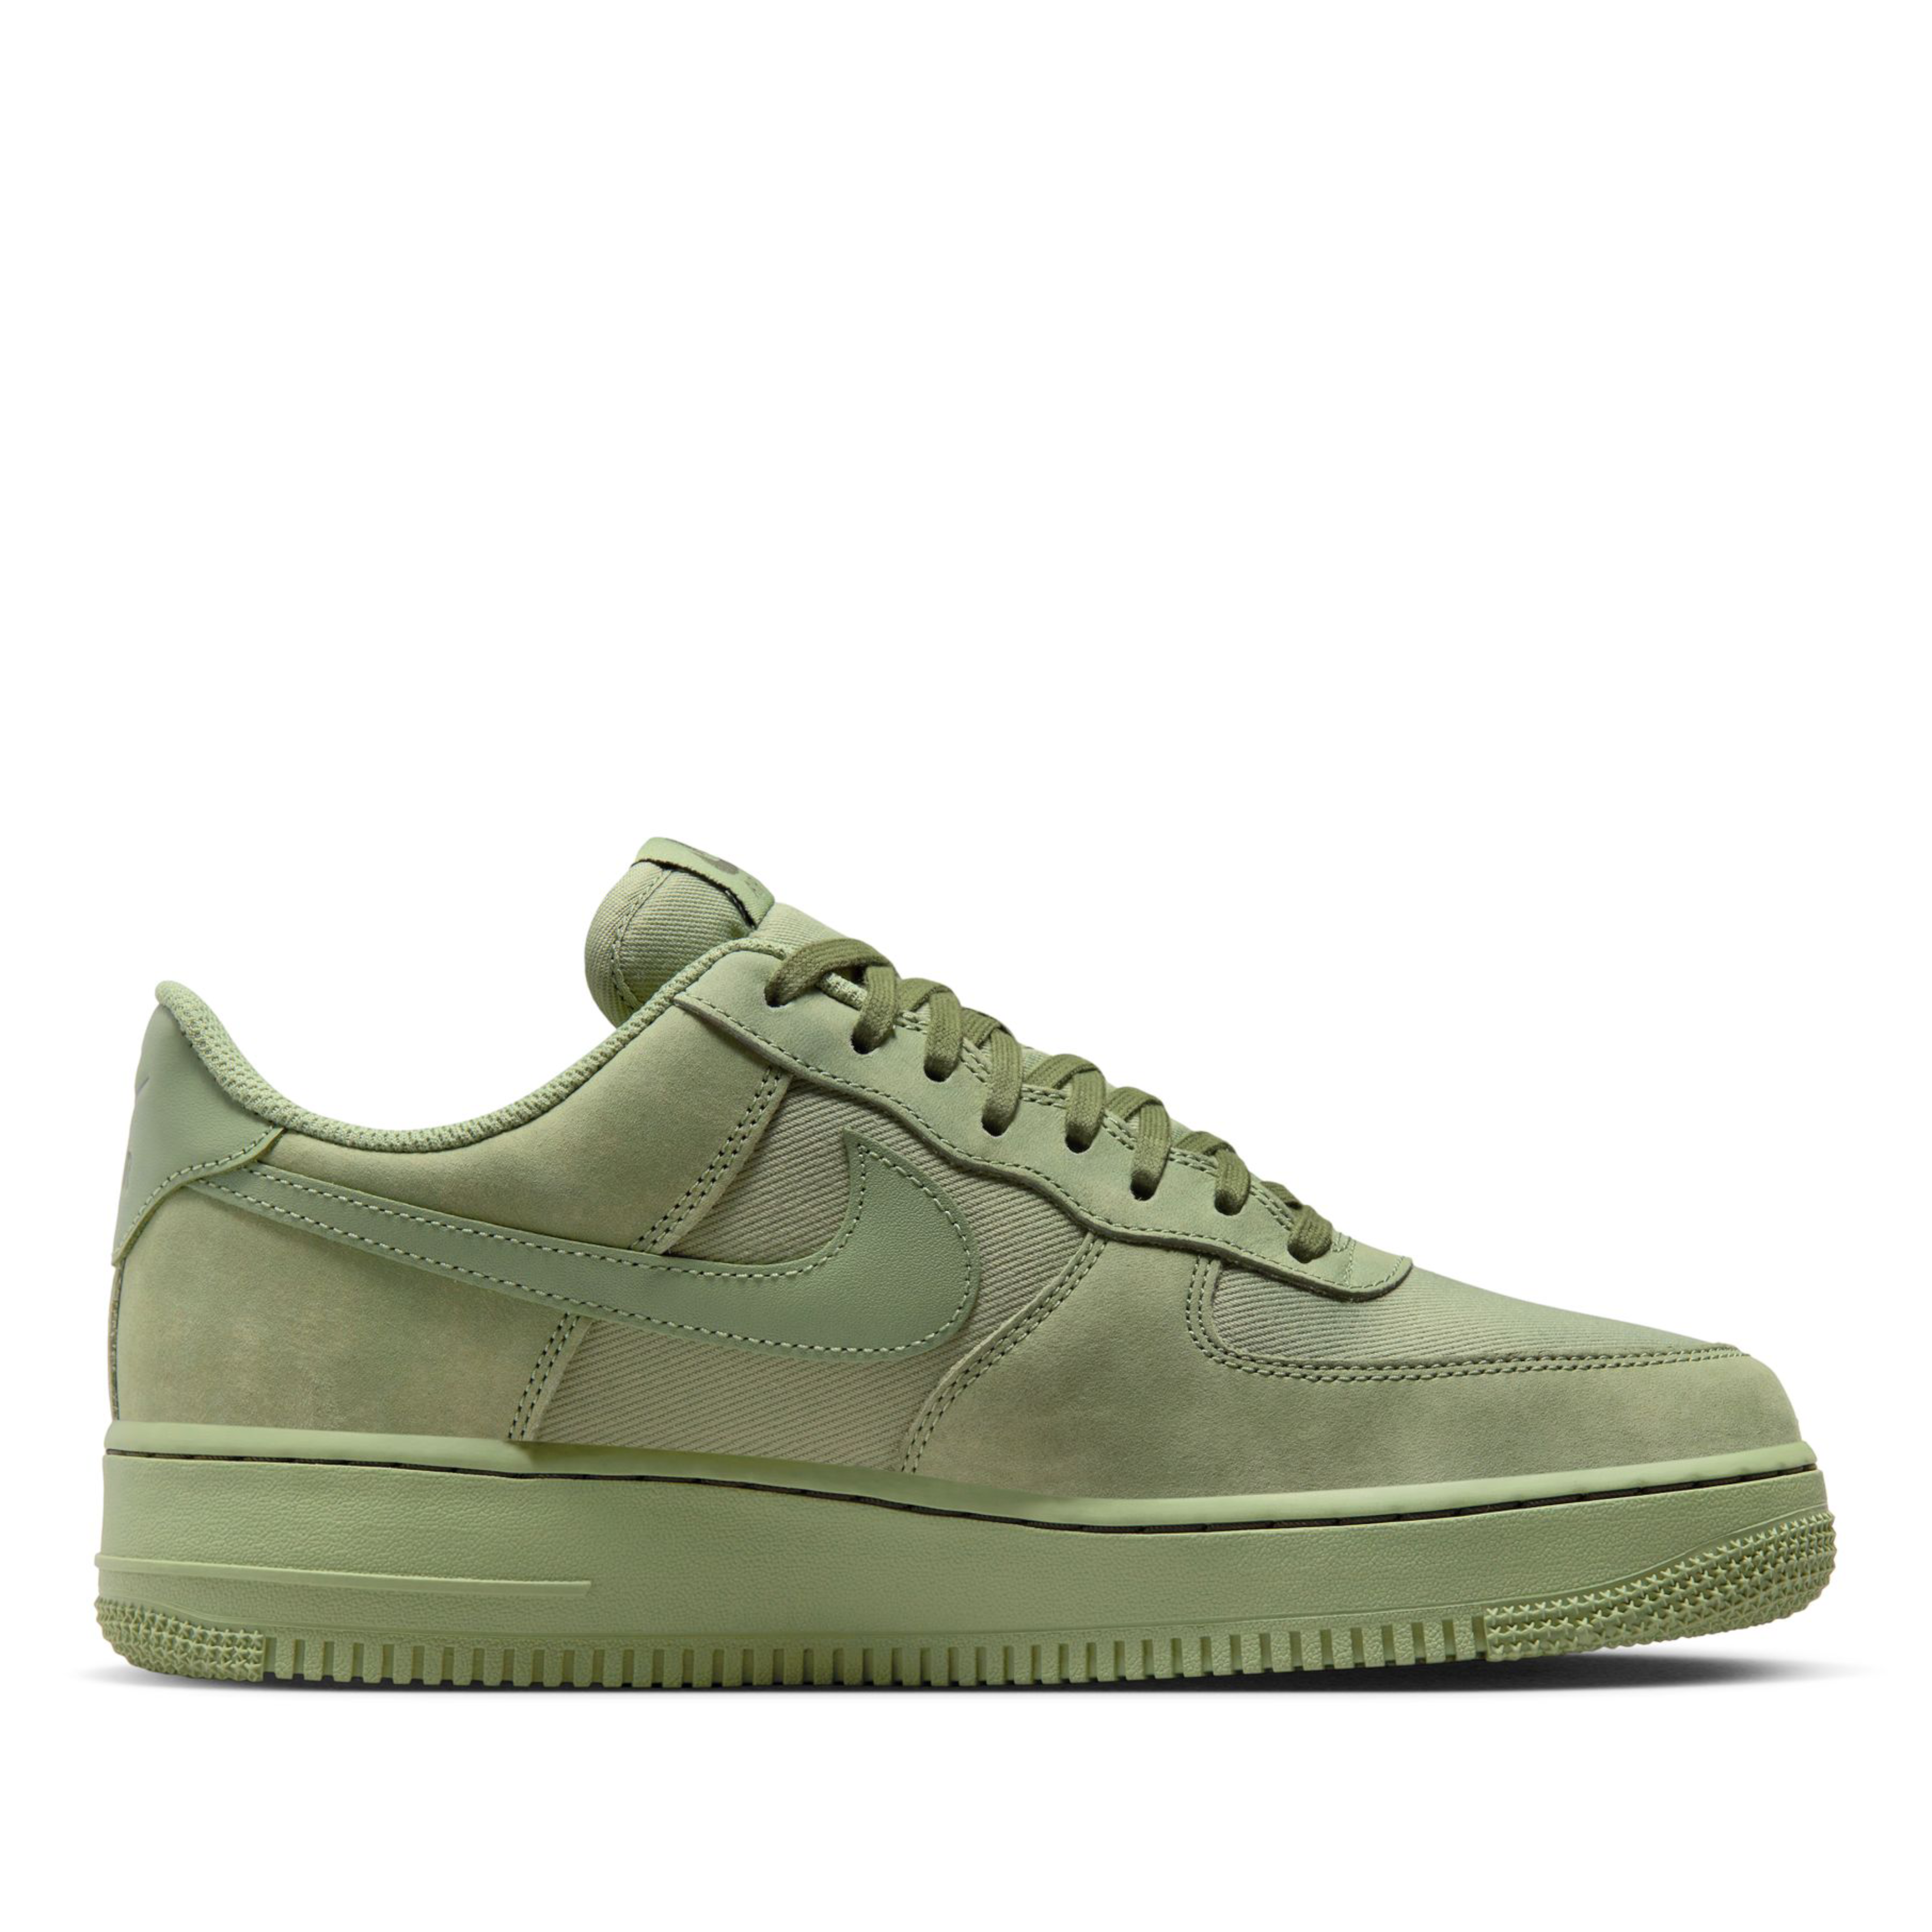 Air Force 1 '07 LV8 'Olive' Cheap 